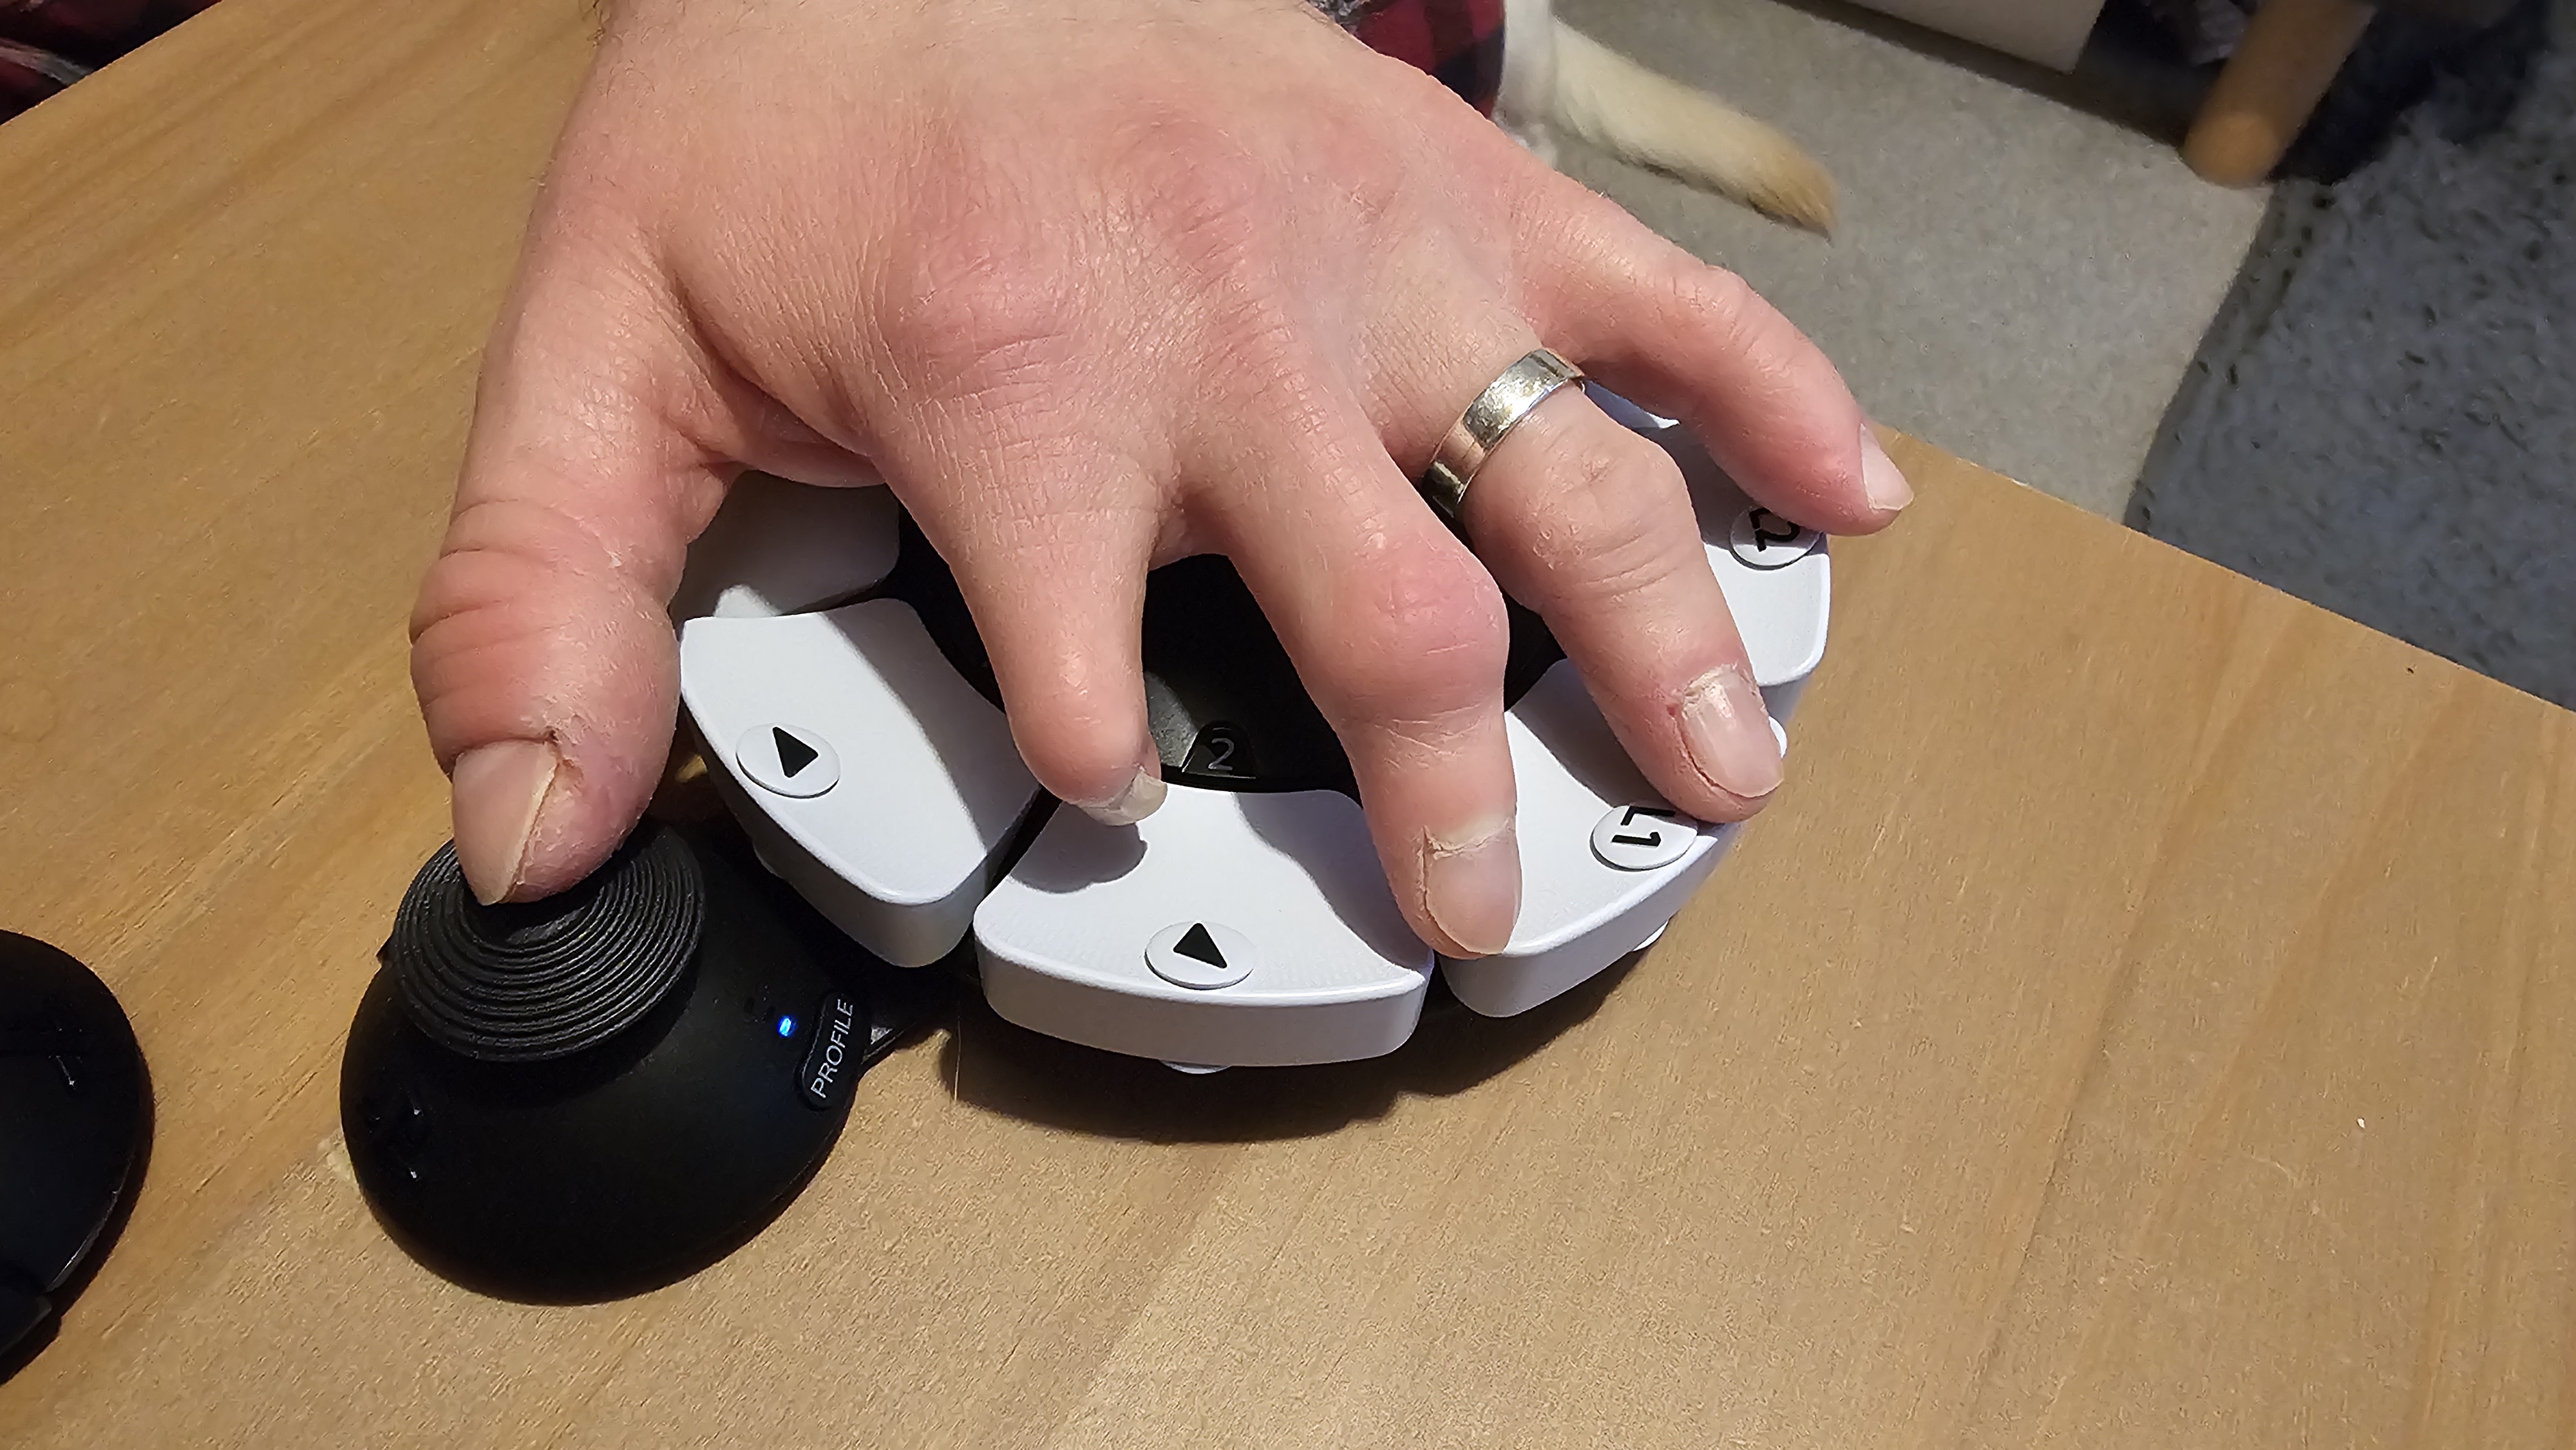 The PlayStation Access controller being used by someone with accessibility needs.